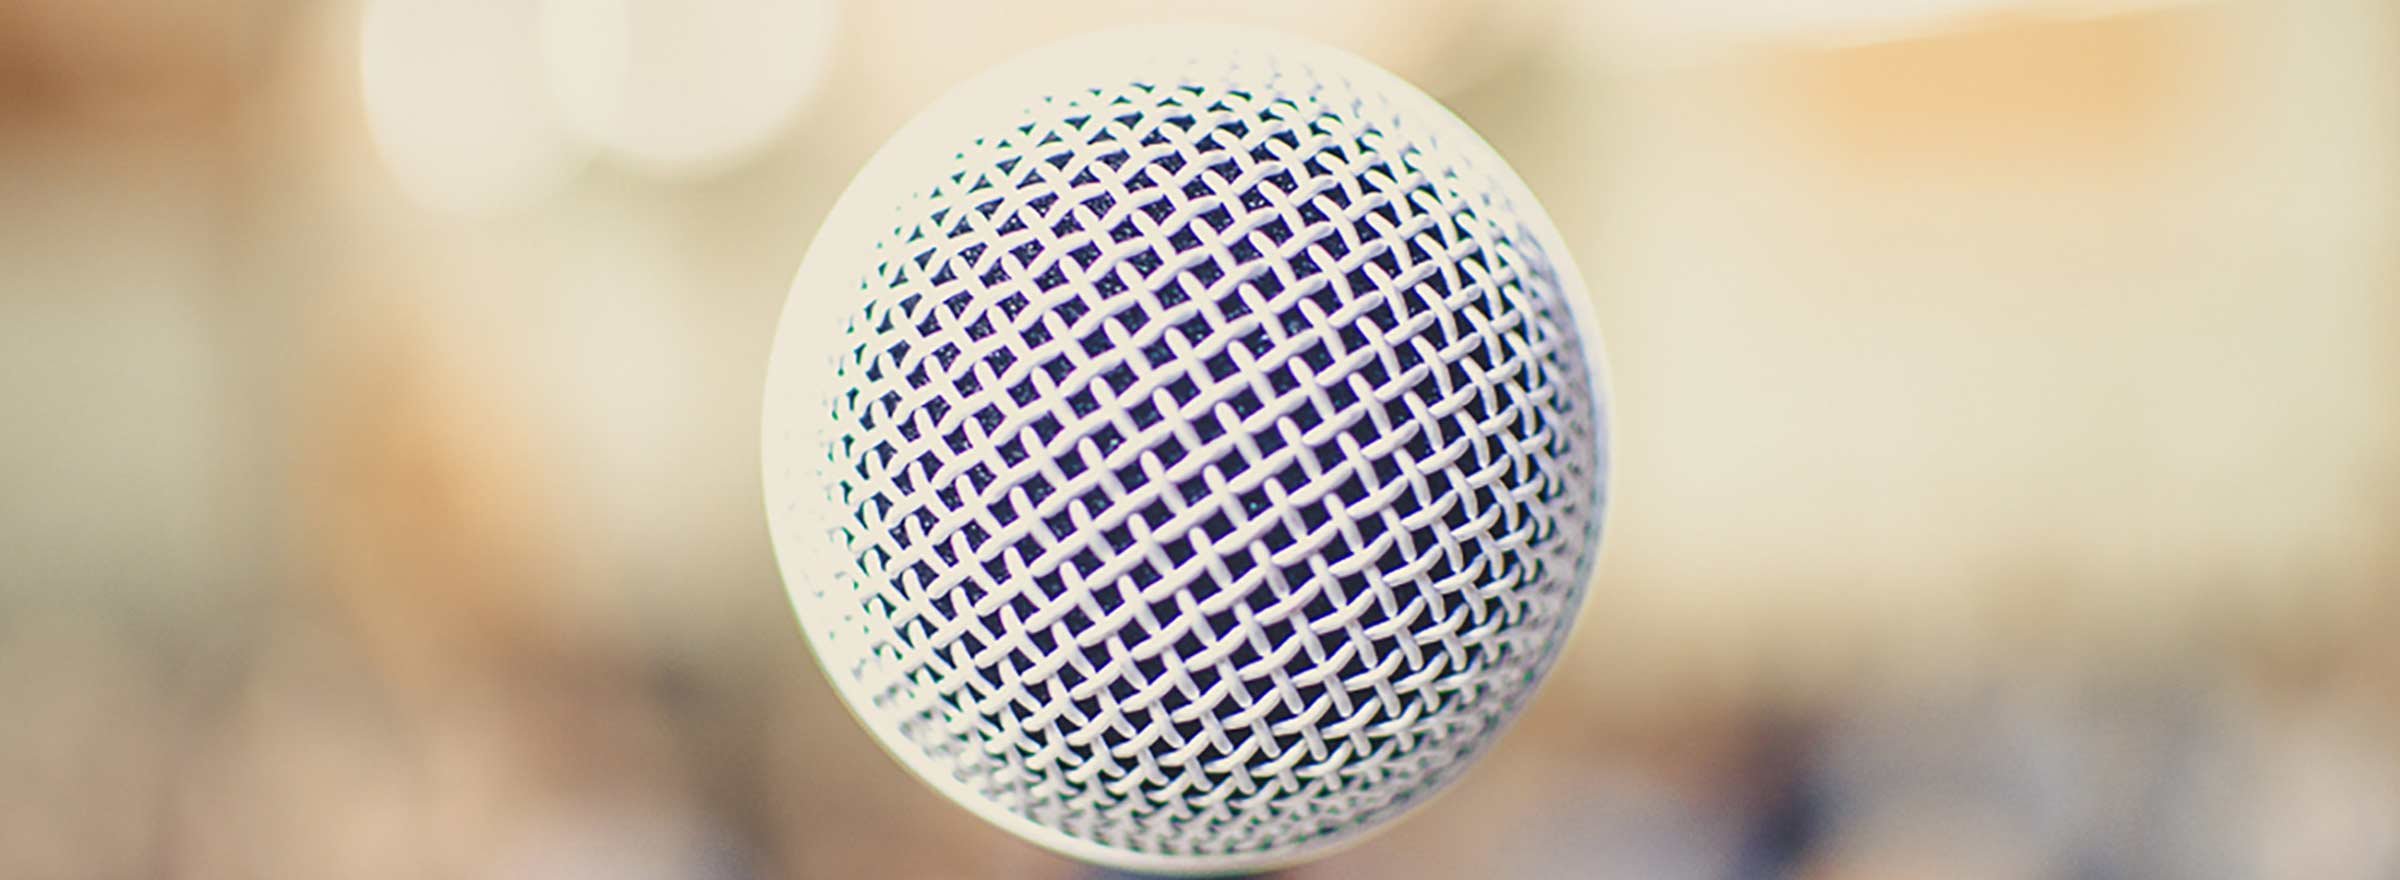 a close-up view of a microphone symbolizing social impact technology panels at sxsw